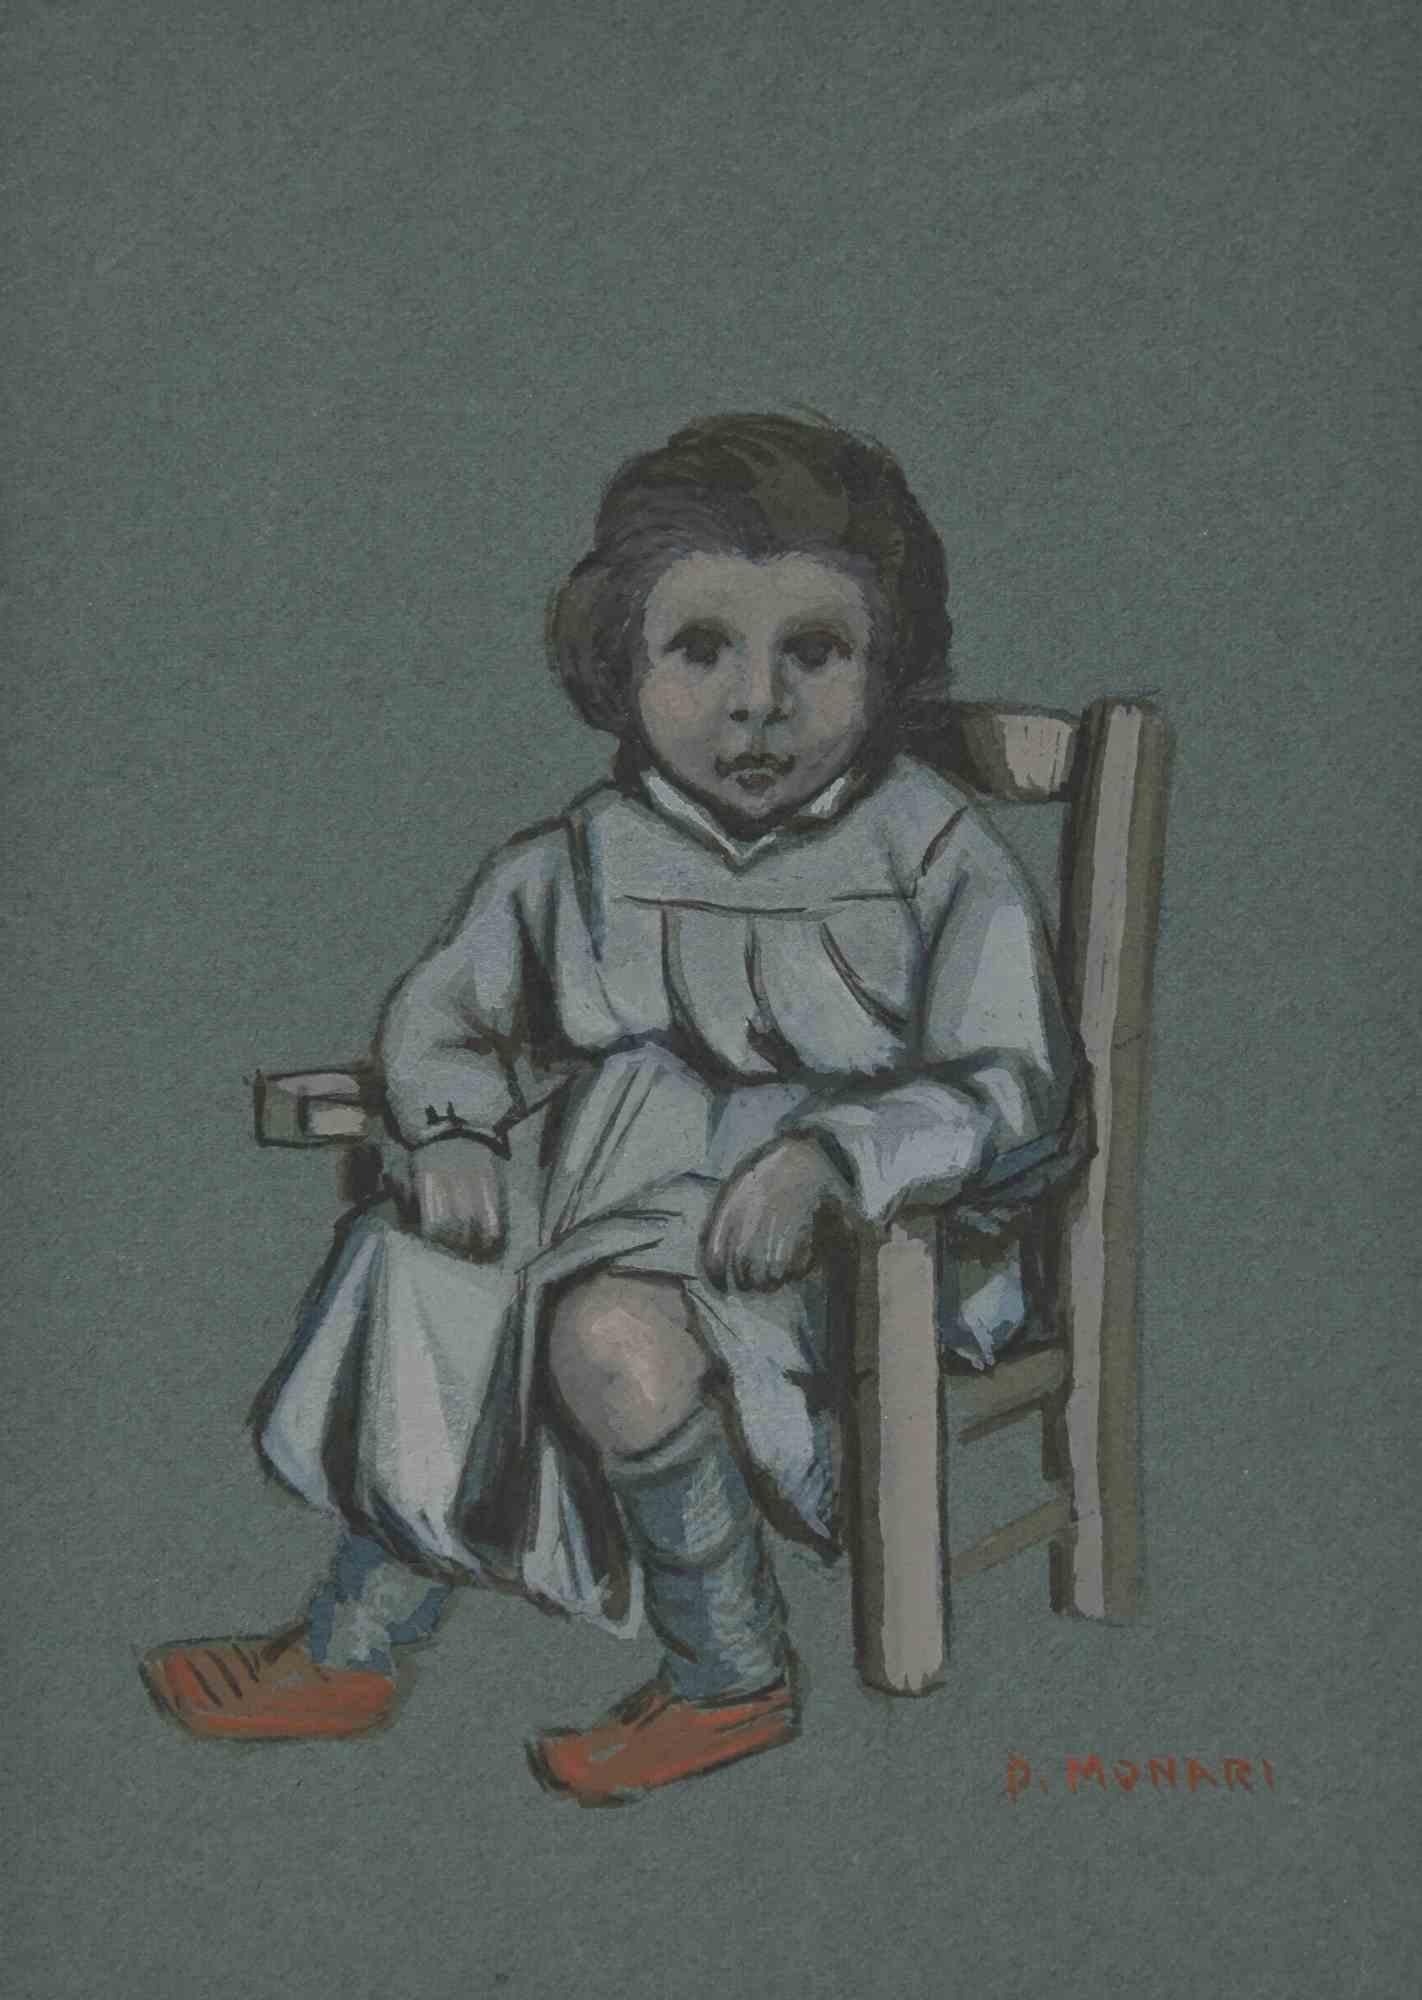 The Baby is a Drawing in pencil, watercolor, and white lead realized by  Augusto Monari in the Early-20th Century.     

Hand-signed on the lower.     

Good conditions, including a creamy-colored Passepartout.     

The artwork is depicted through